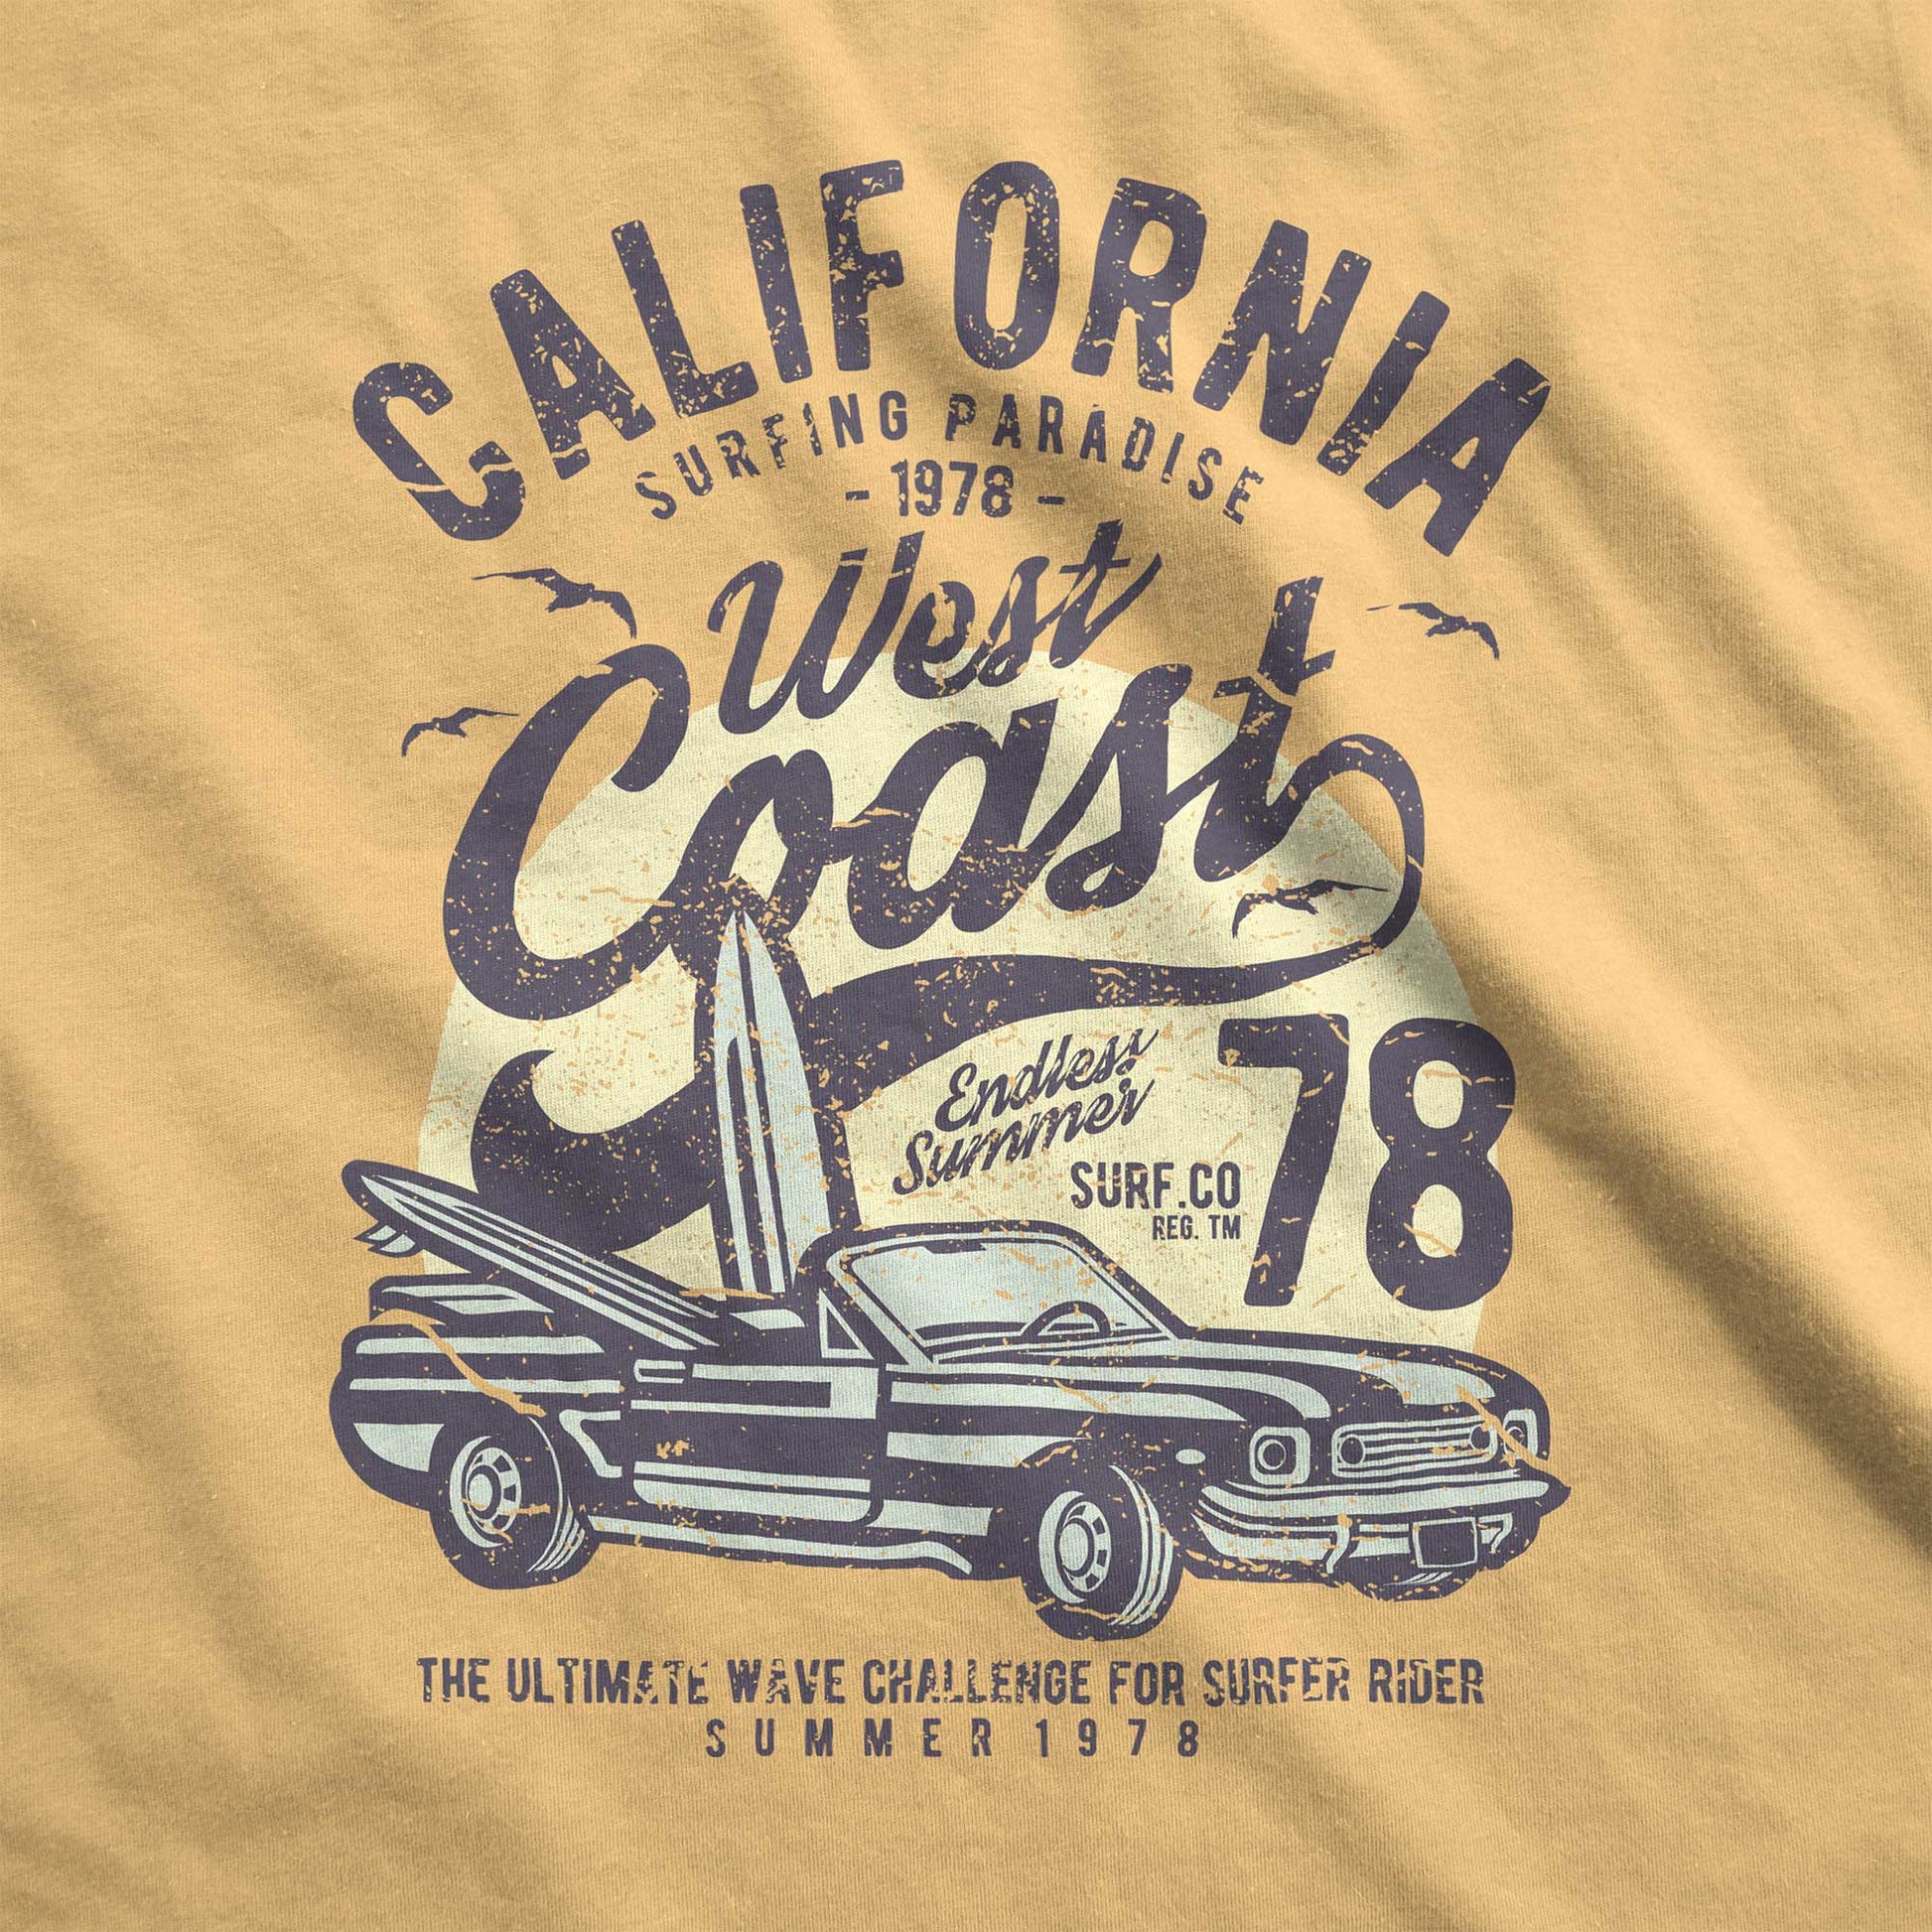 A mustard yellow Comfort Colors swatch with surfboards inside a convertible and the words California west coast surfing paradise